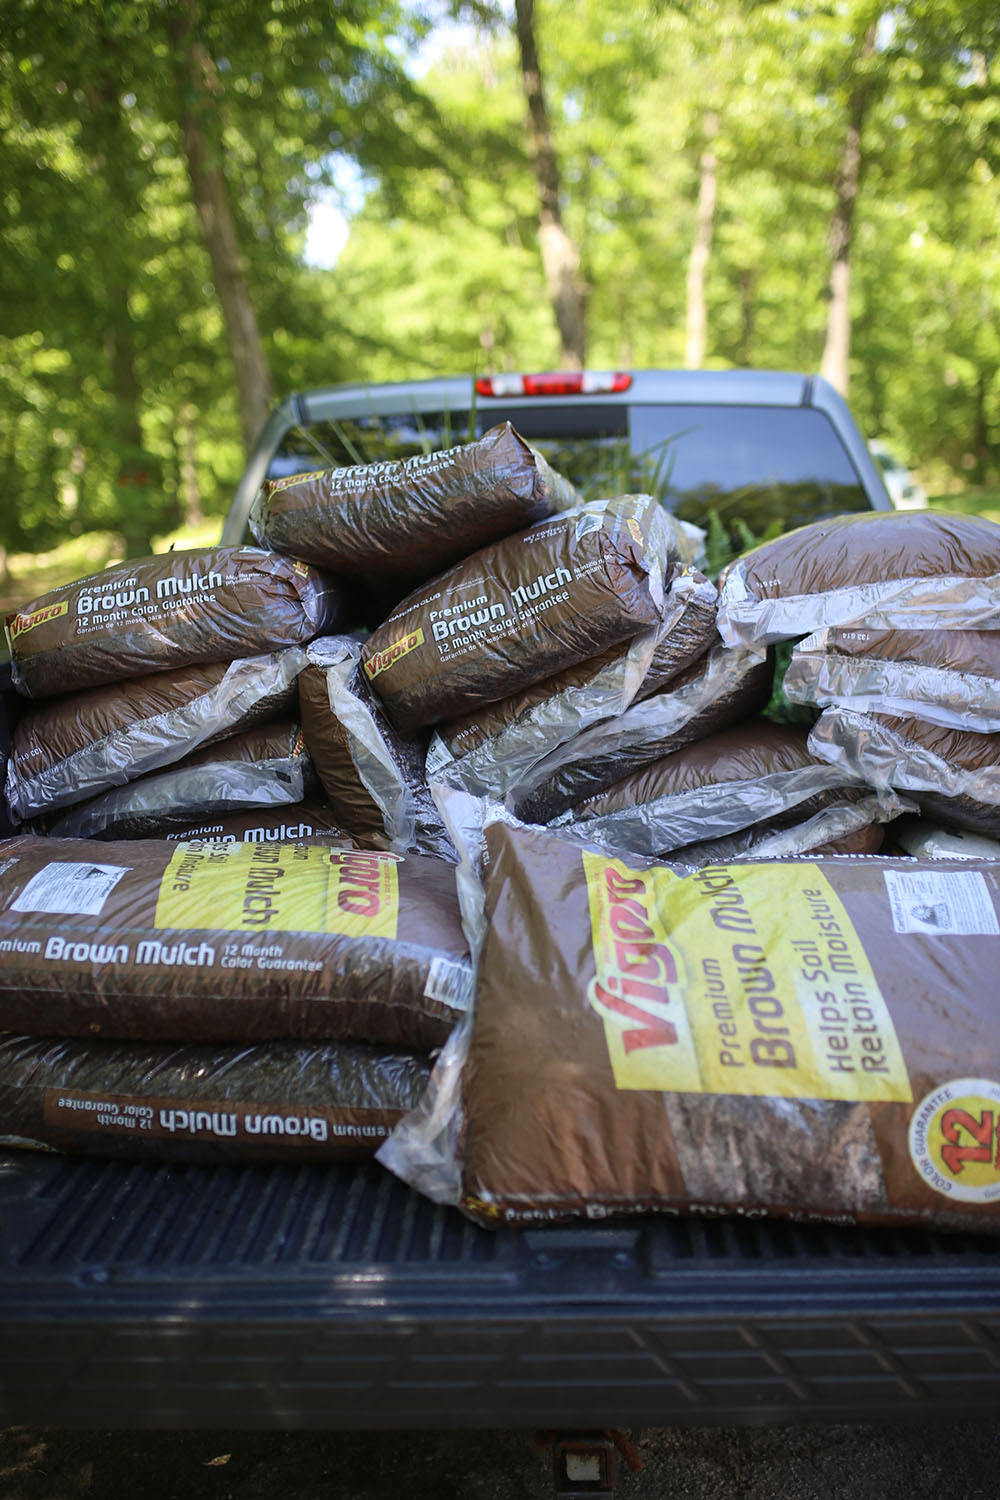 A truck bed filled with bags of Vigoro brown mulch.